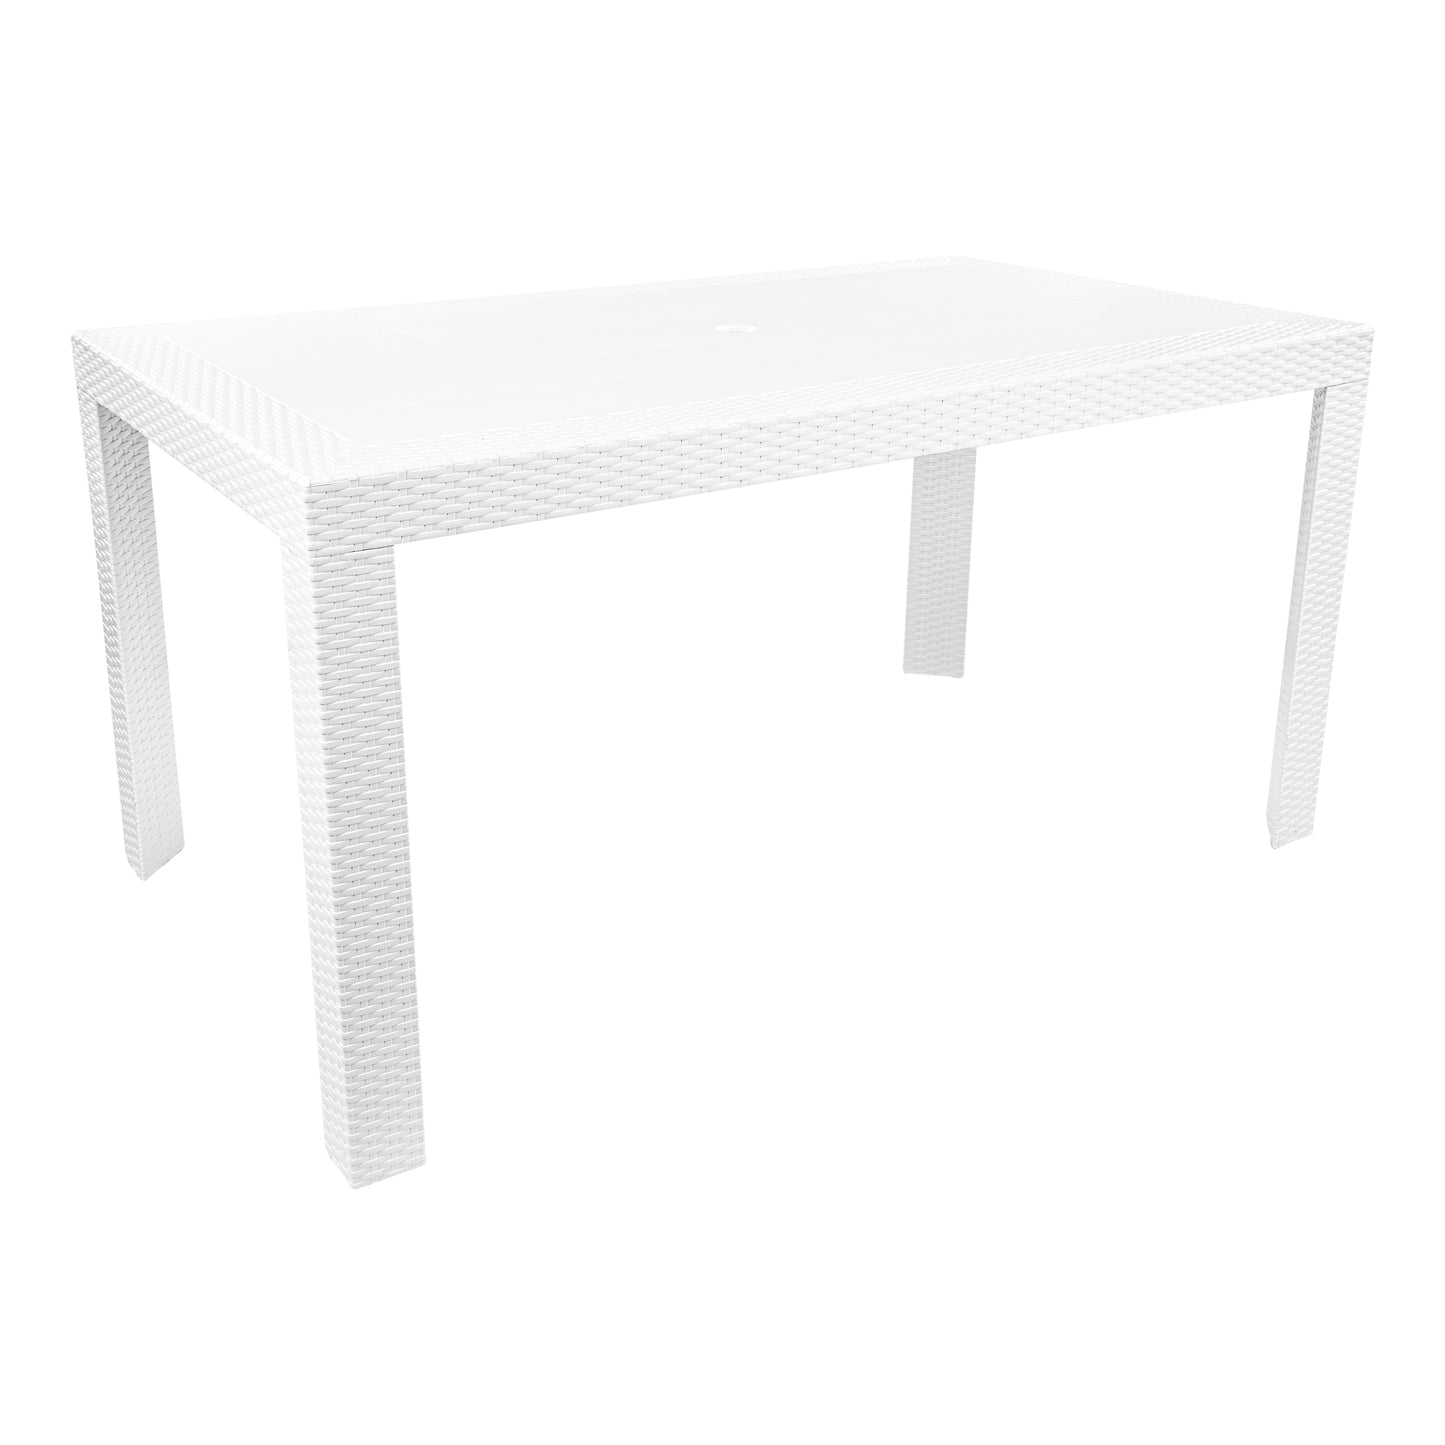 Hans 55" Weave Design Outdoor Dining Table